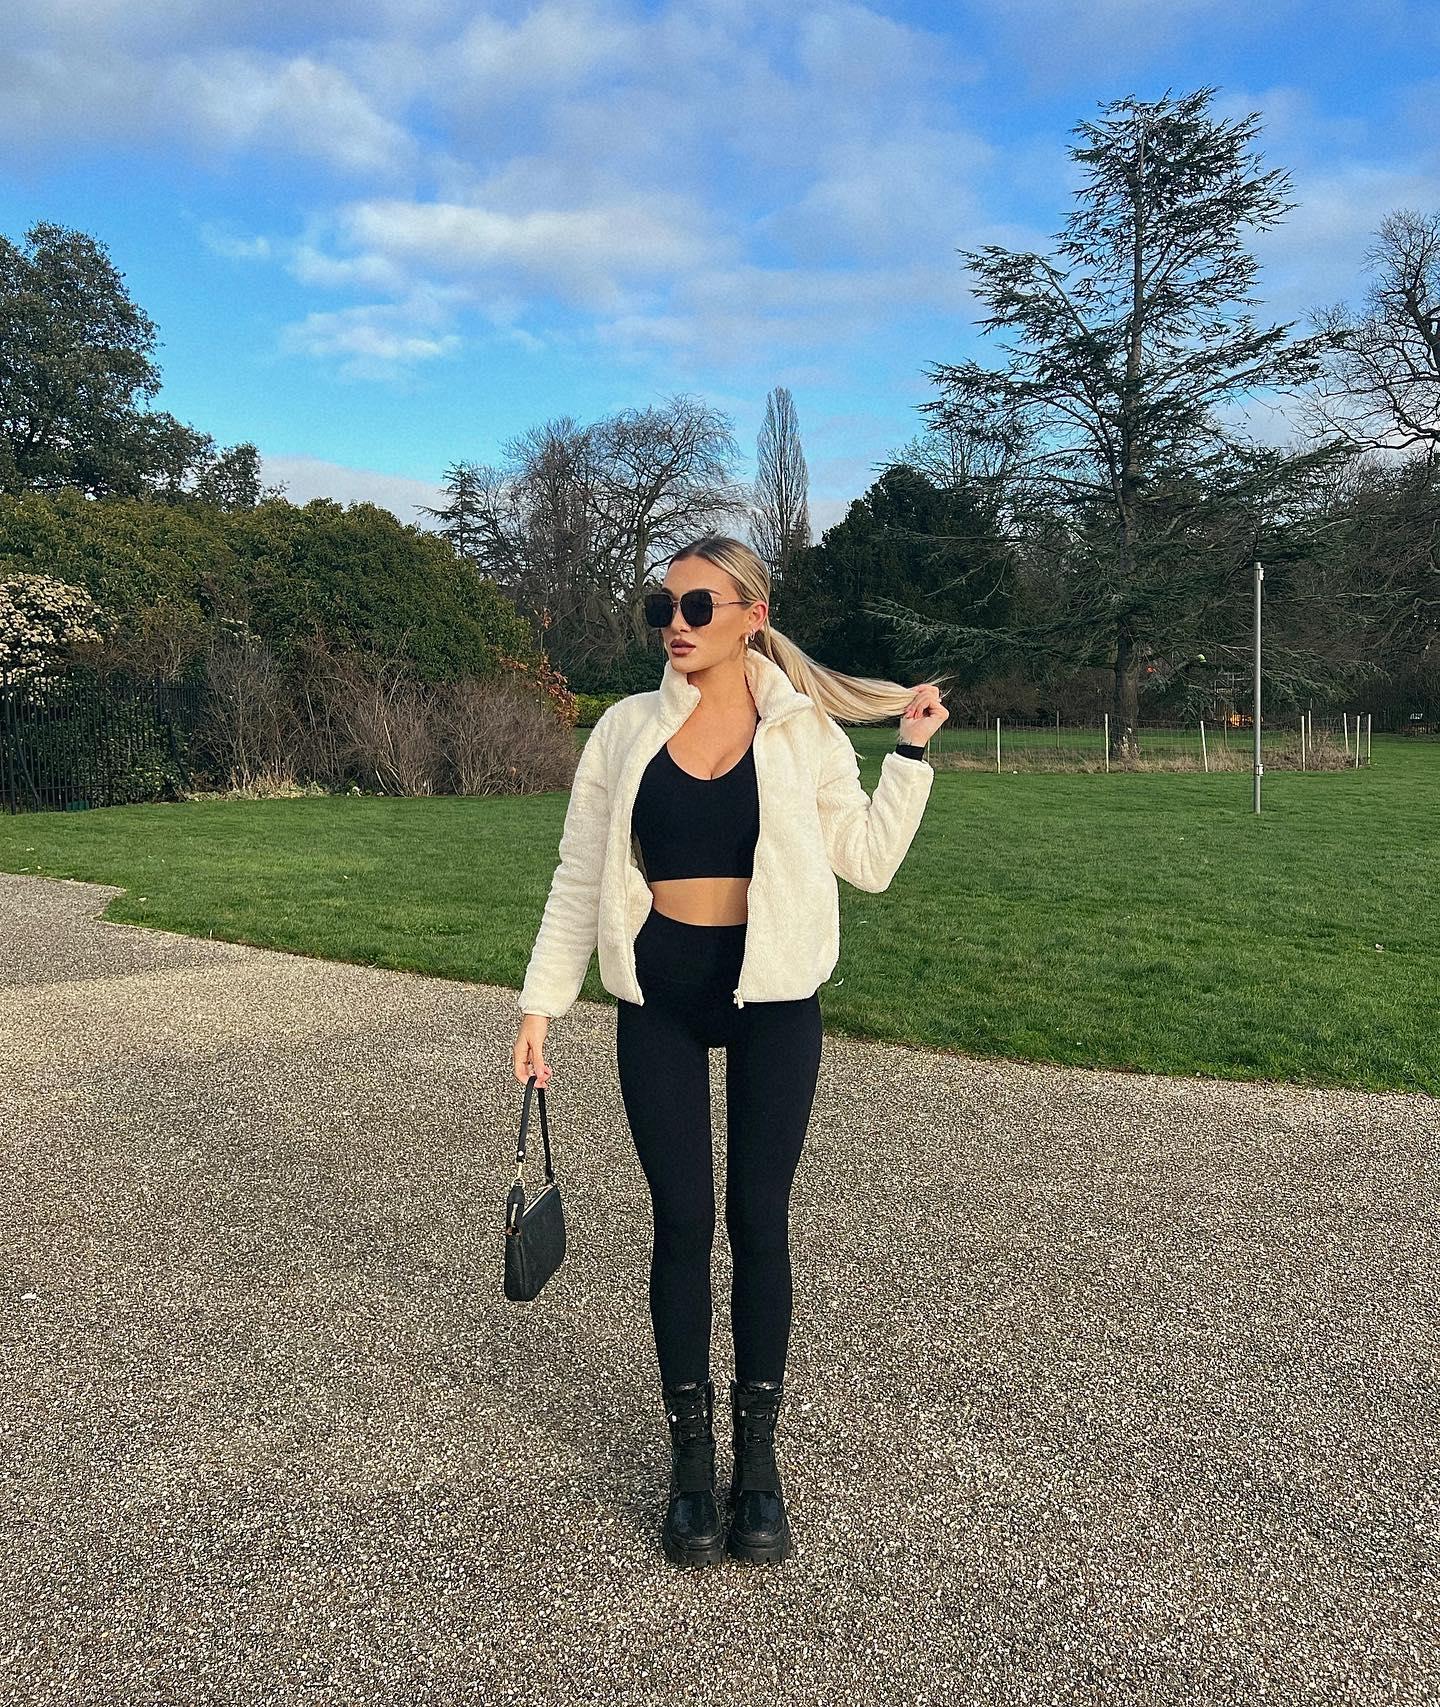 Beaux Raymond in a black crop top and white jacket